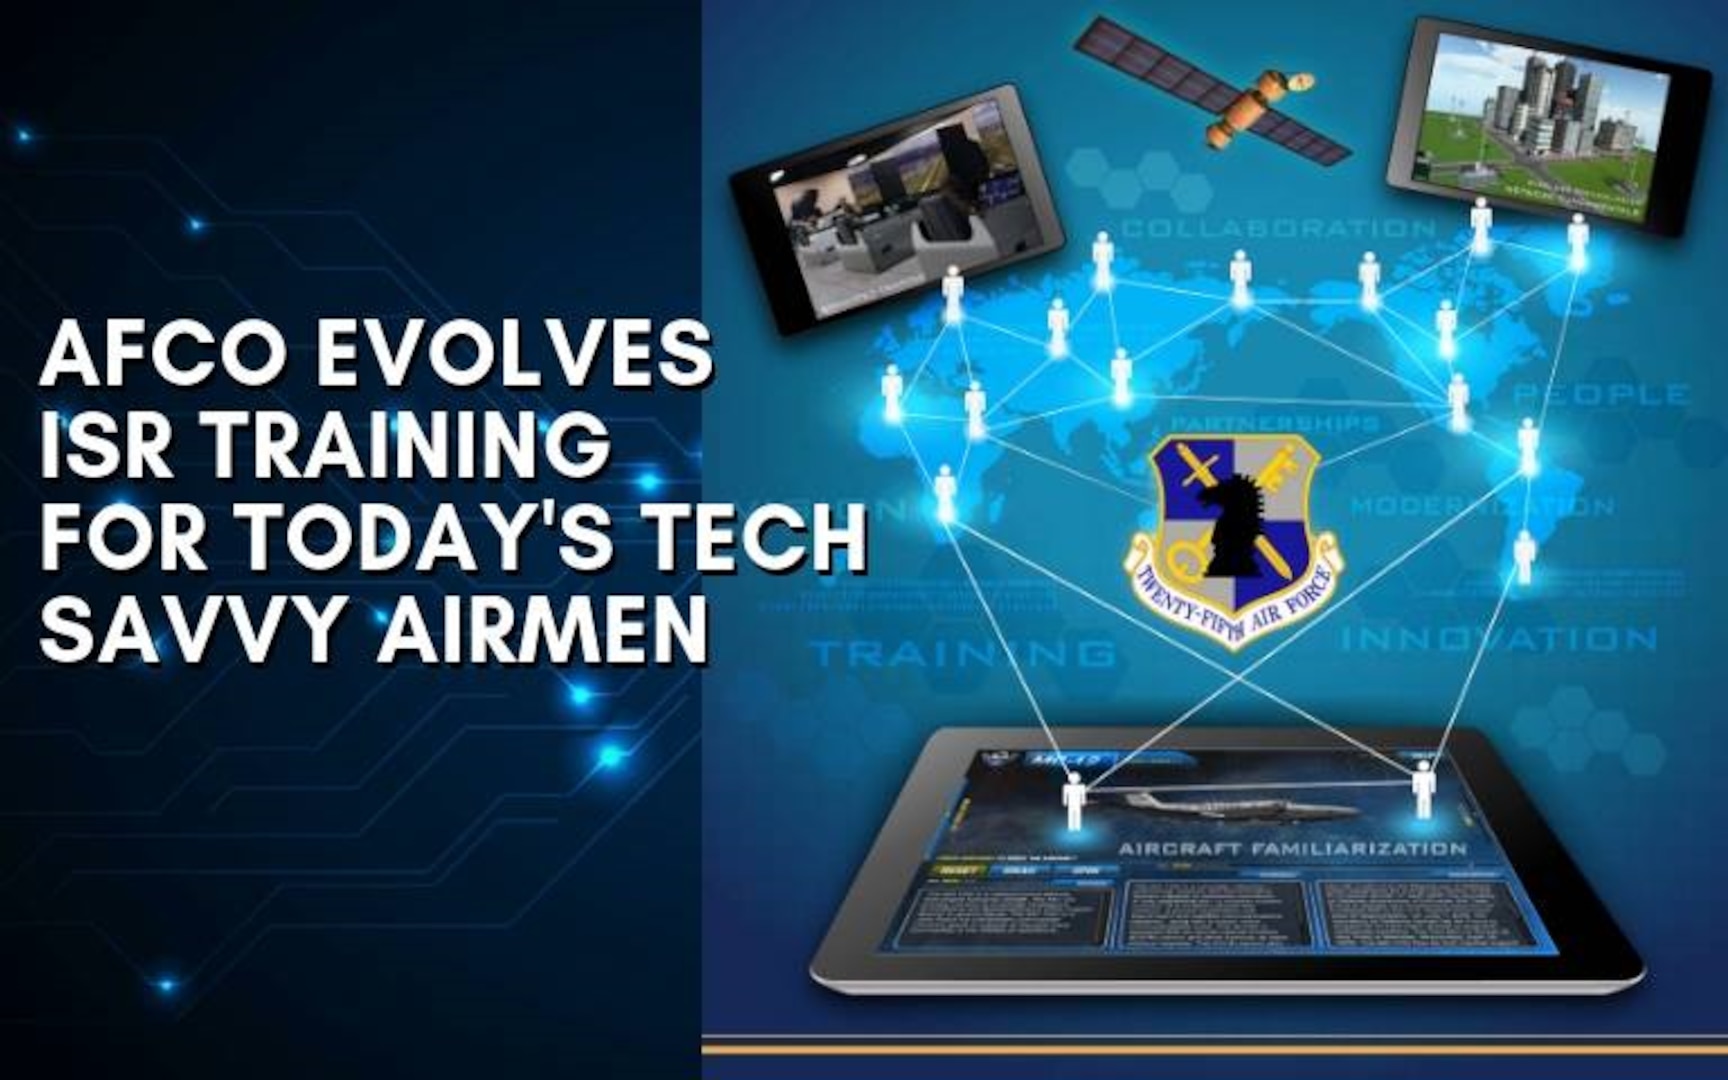 The Intelligence, Surveillance and Reconnaissance Airmen in today’s Air Force are much more technologically savvy than their predecessors, and the Air Force Cryptologic Office at Twenty-Fifth Air Force is revolutionizing the way modern Airmen learn to win the fight.